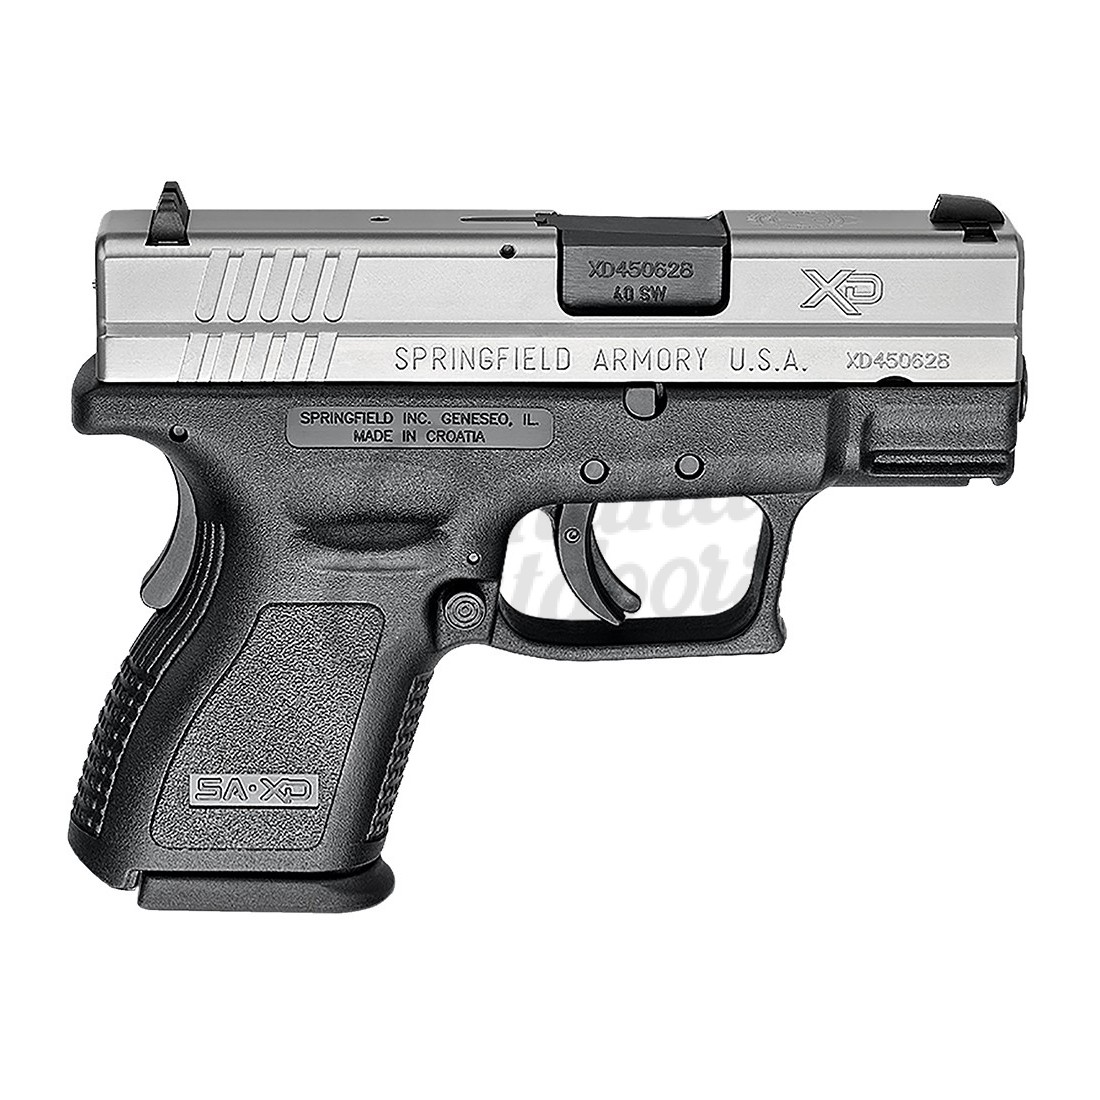 Springfield Armory XD Subcompact Pistol 9 RD 40 S&W Stainless Slide XD9822